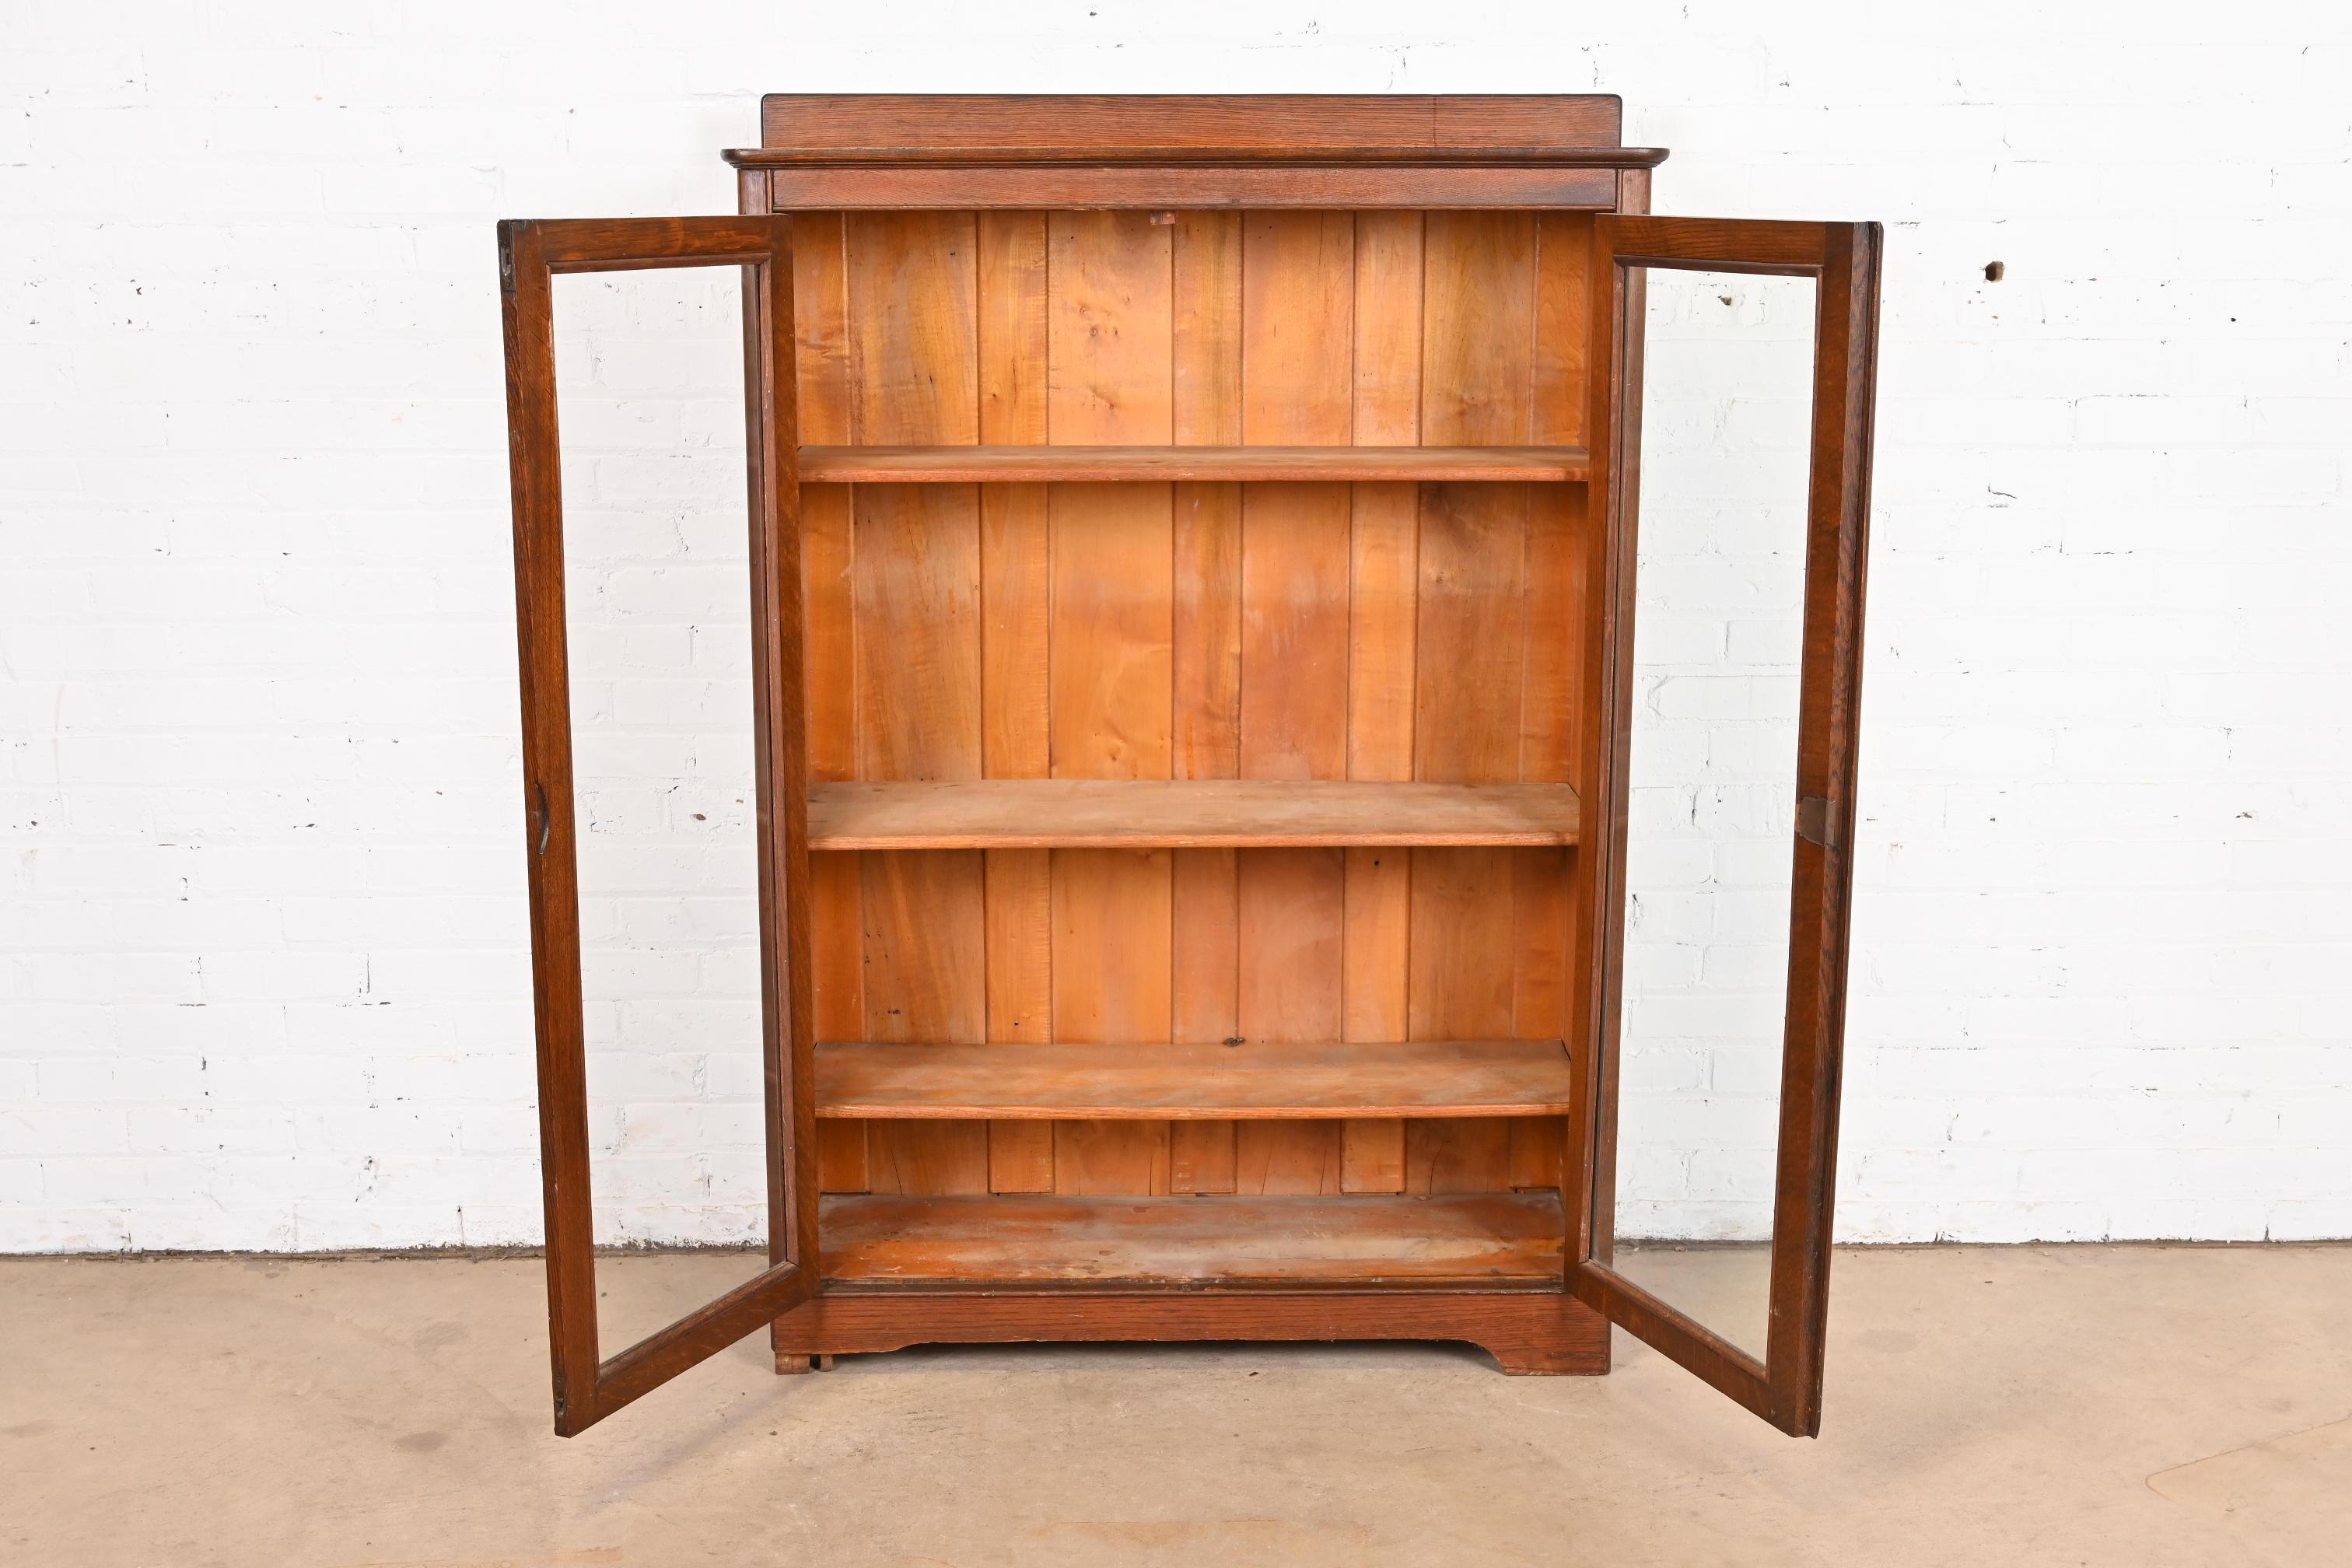 Antique Arts & Crafts Glass Front Bookcase by Larkin Co., Circa 1900 For Sale 1